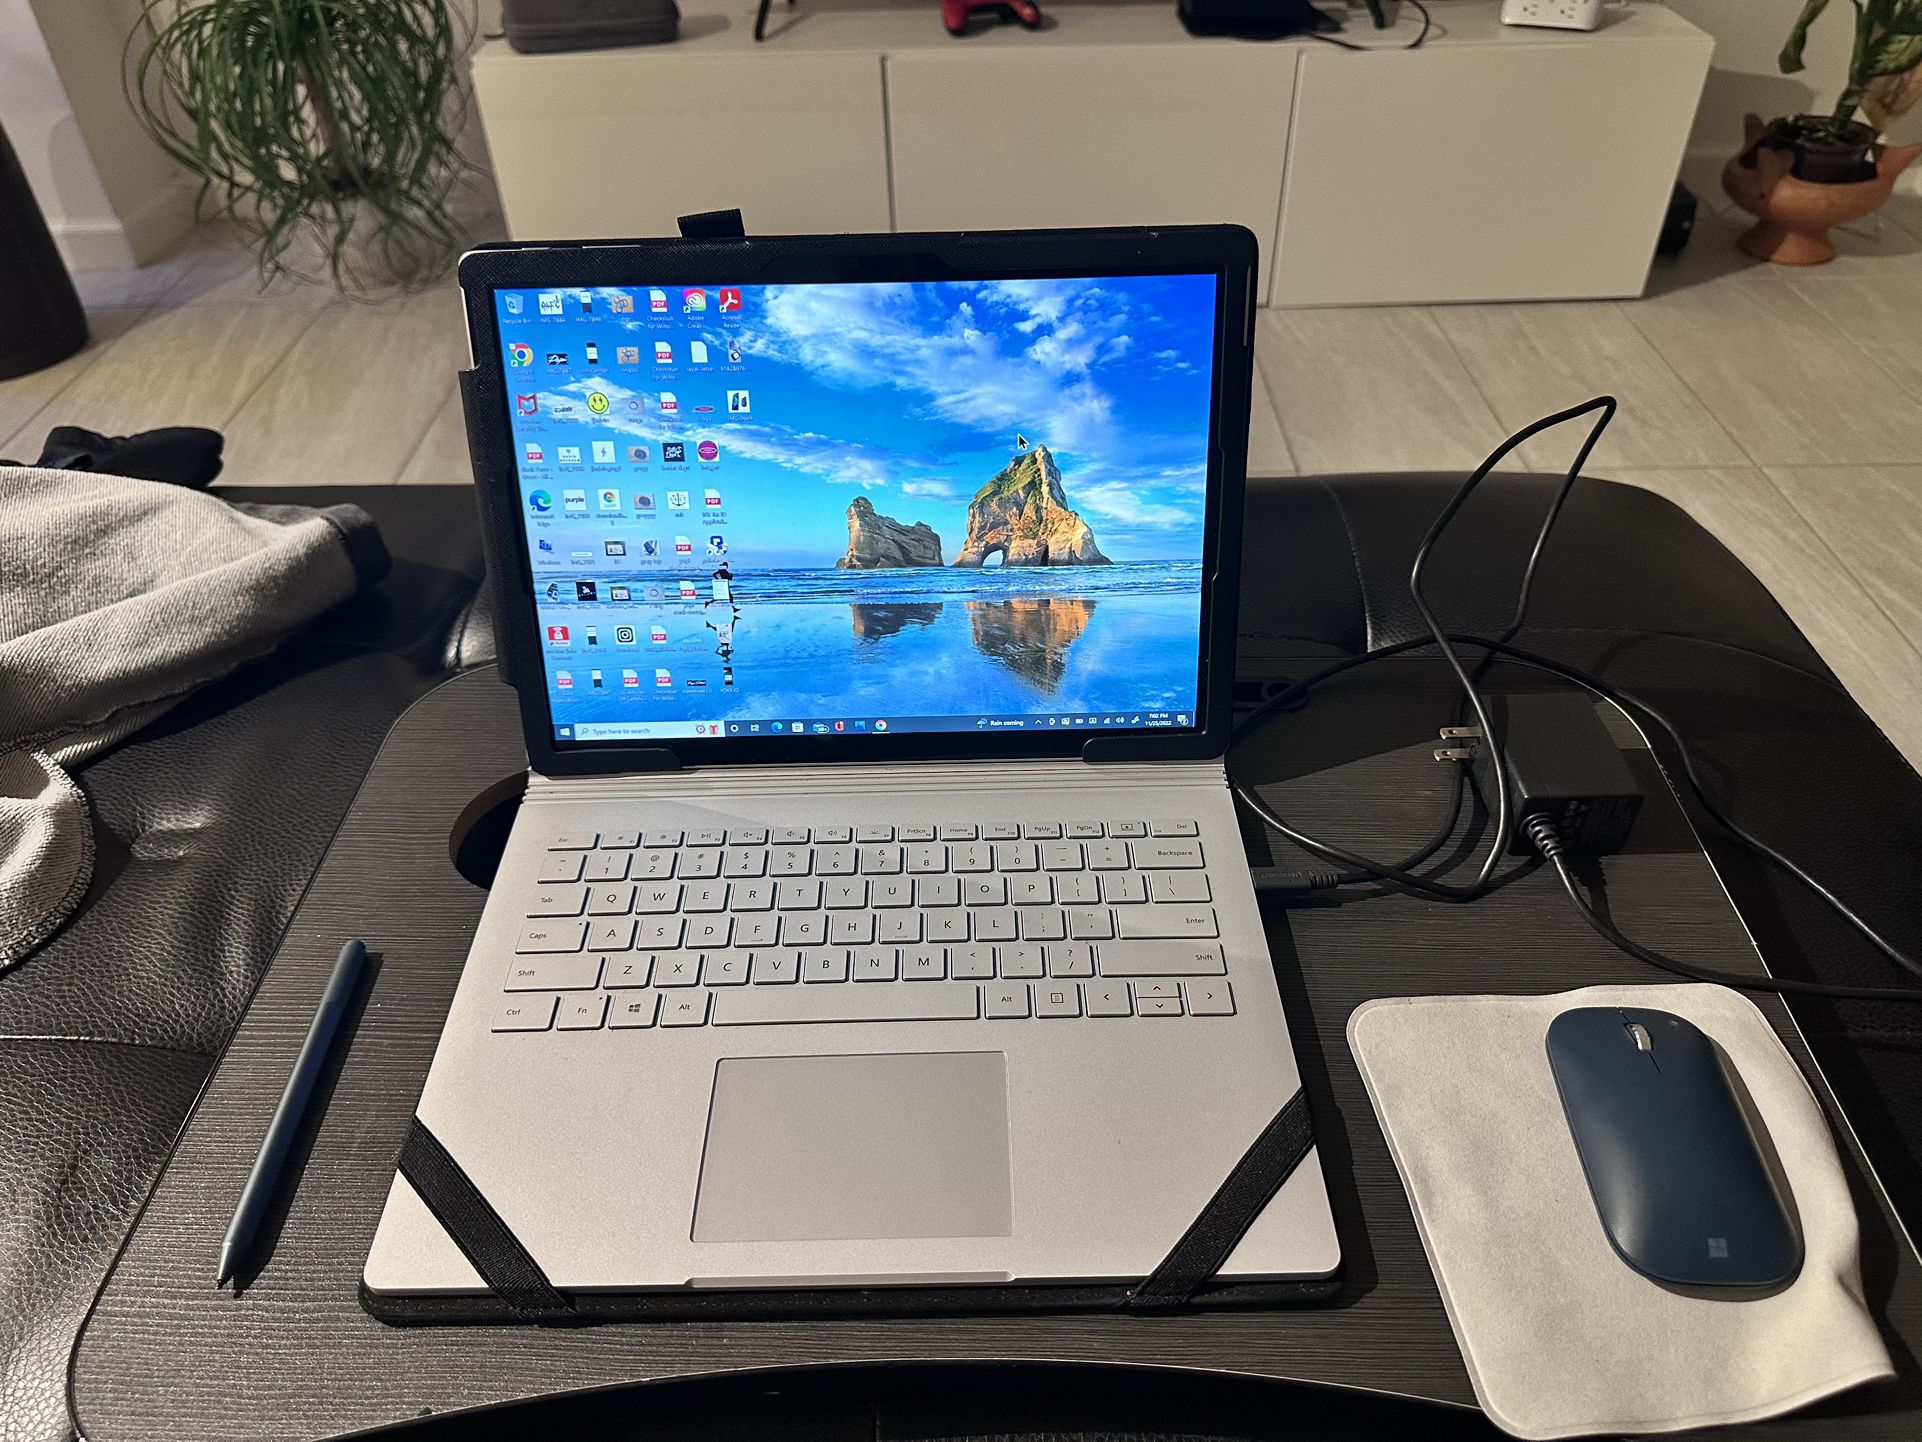 Laptop Surface Book 2 With Pen & Mouse